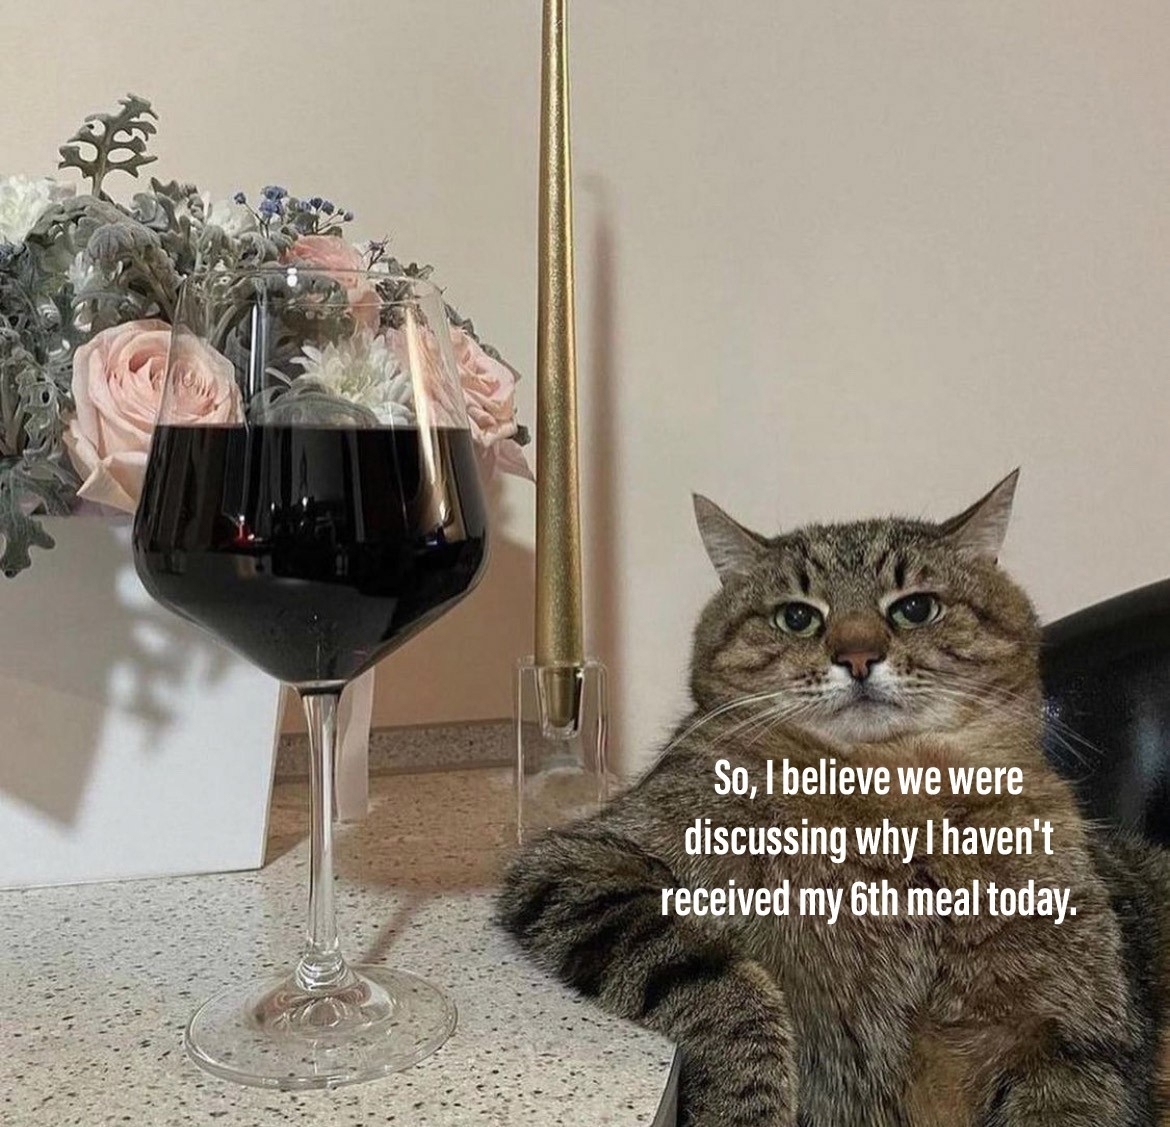 dank memes - funny memes - cat with wine glass - So, I believe we were discussing why I haven't received my 6th meal today.